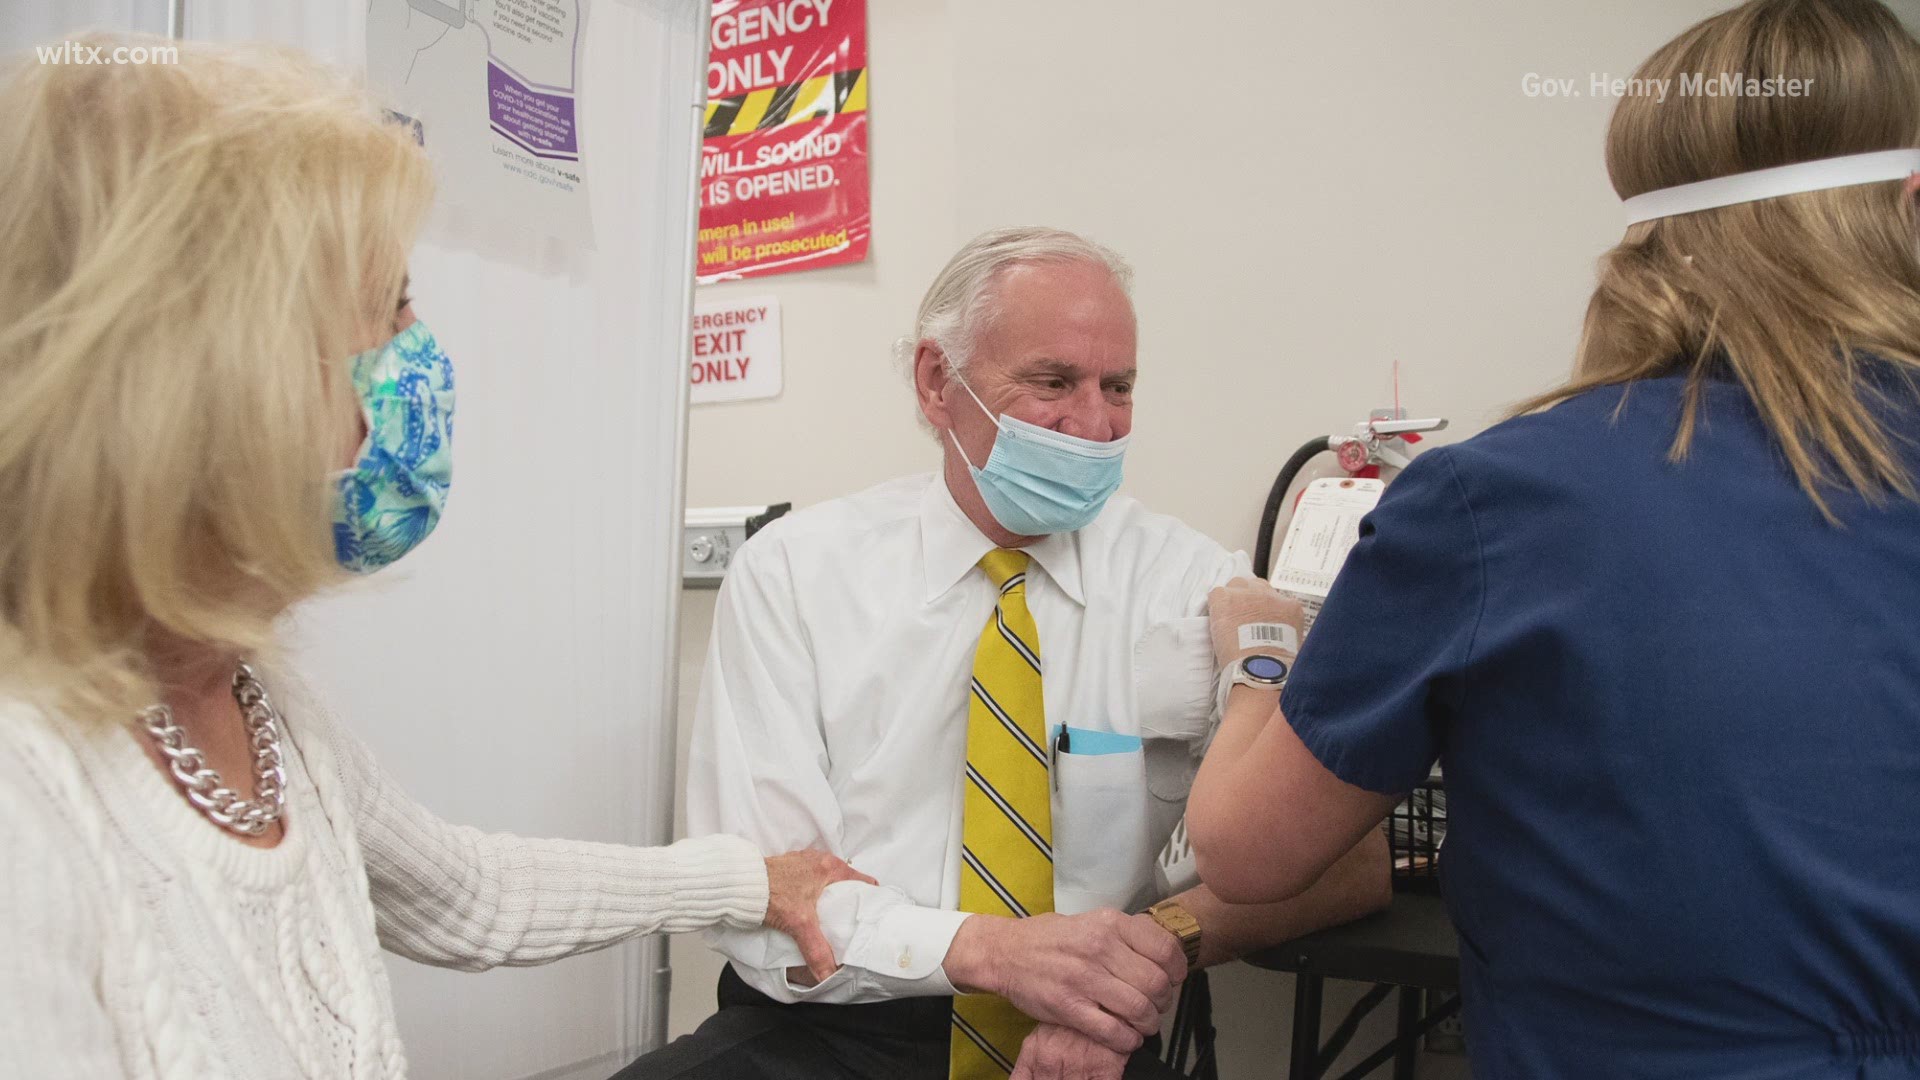 The South Carolina governor got his Pfizer vaccine shot in the morning